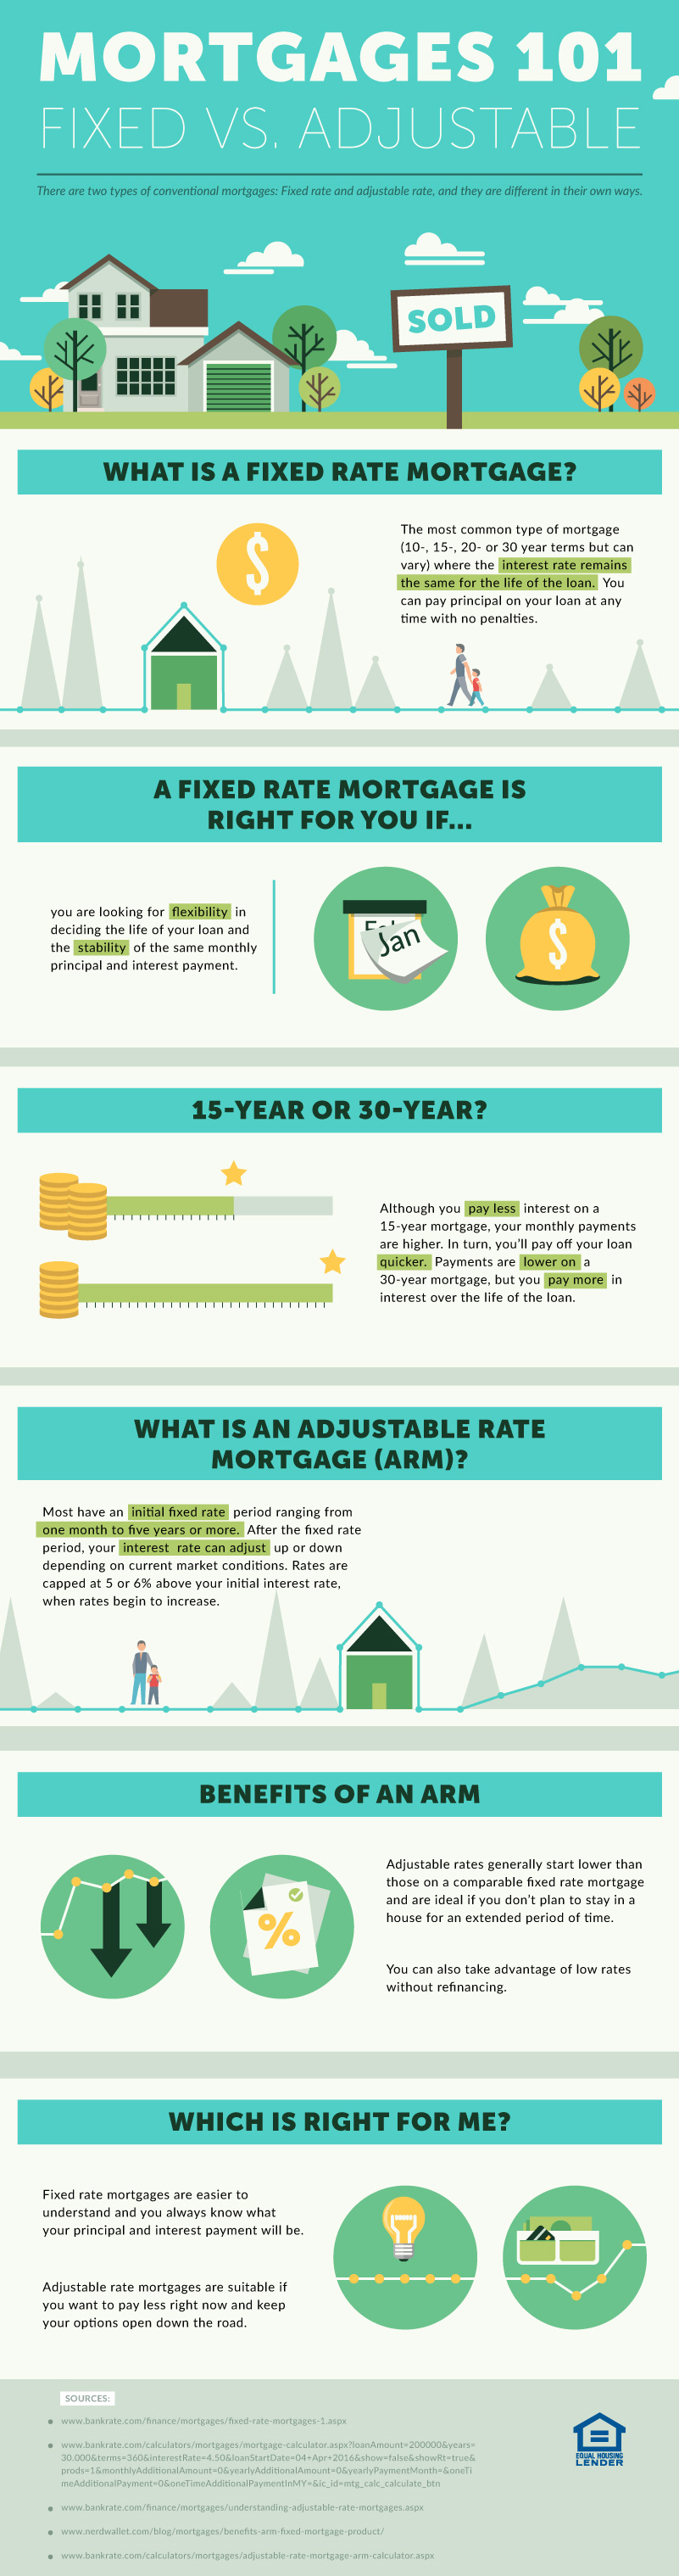 What Is An Adjustable-Rate Mortgage?